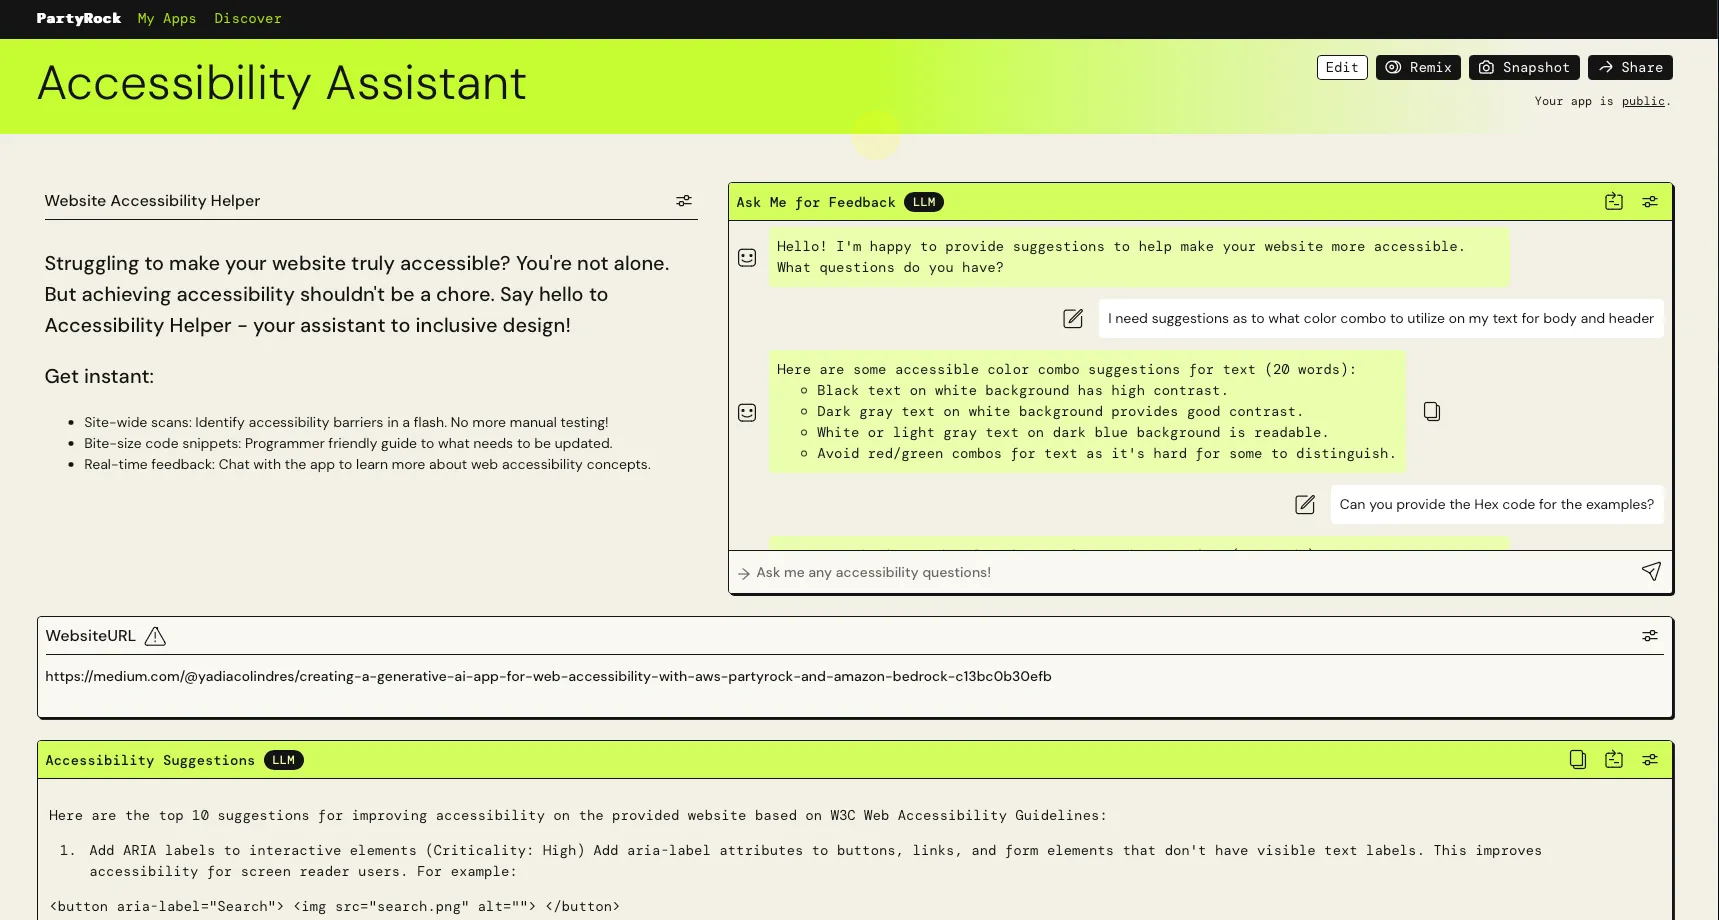 Screenshot of feedback of Assistant after reviewing a website via URL.